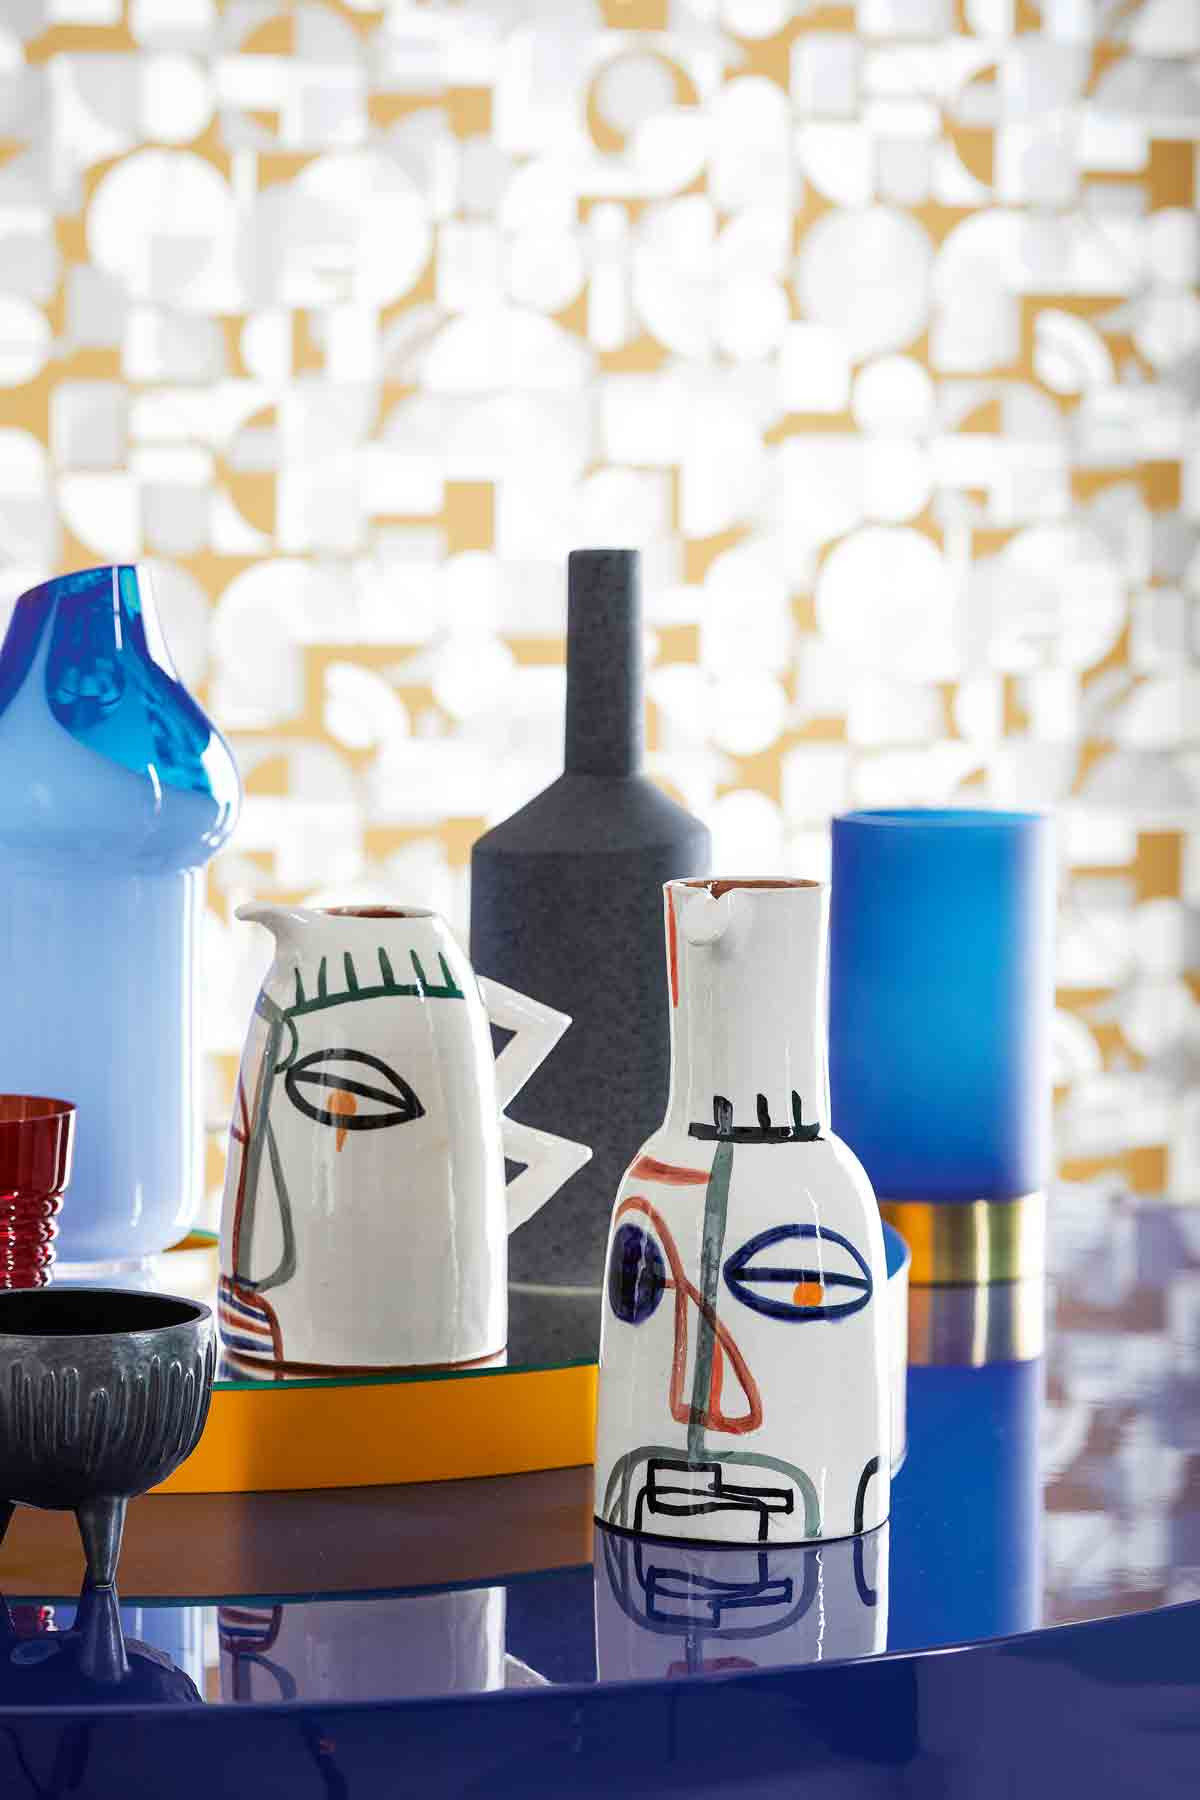 30 Great Jonathan Adler Gala Vase 2024 free download jonathan adler gala vase of how to decorate with cubism and picasso inspired abstract shapes within nasonmoretti red whisky glass a60 william and visage face